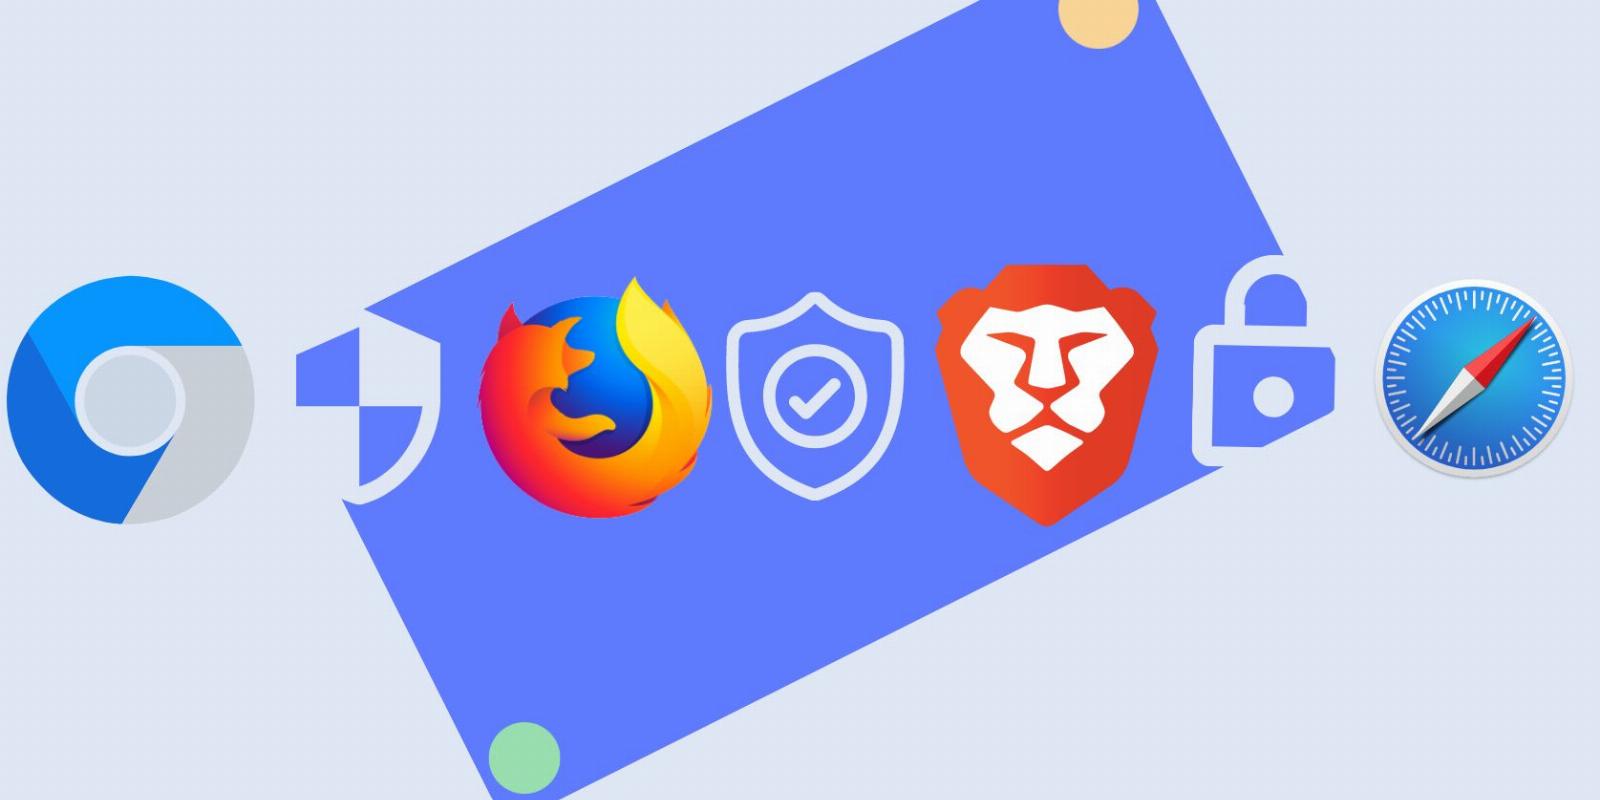 What Makes a Web Browser Secure? Look for These Features